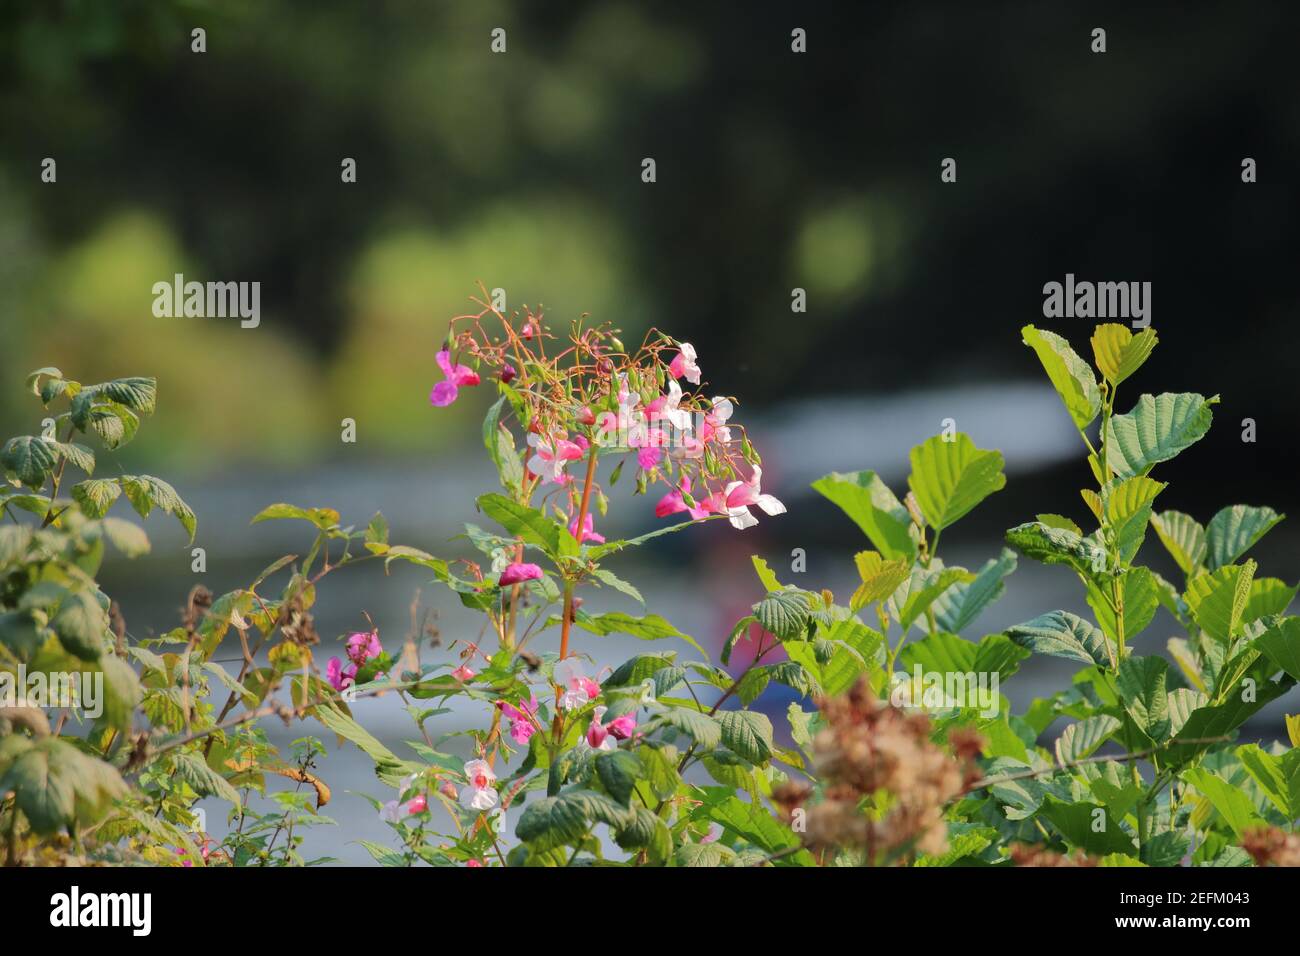 close up of a flowering plant n front of a river Stock Photo